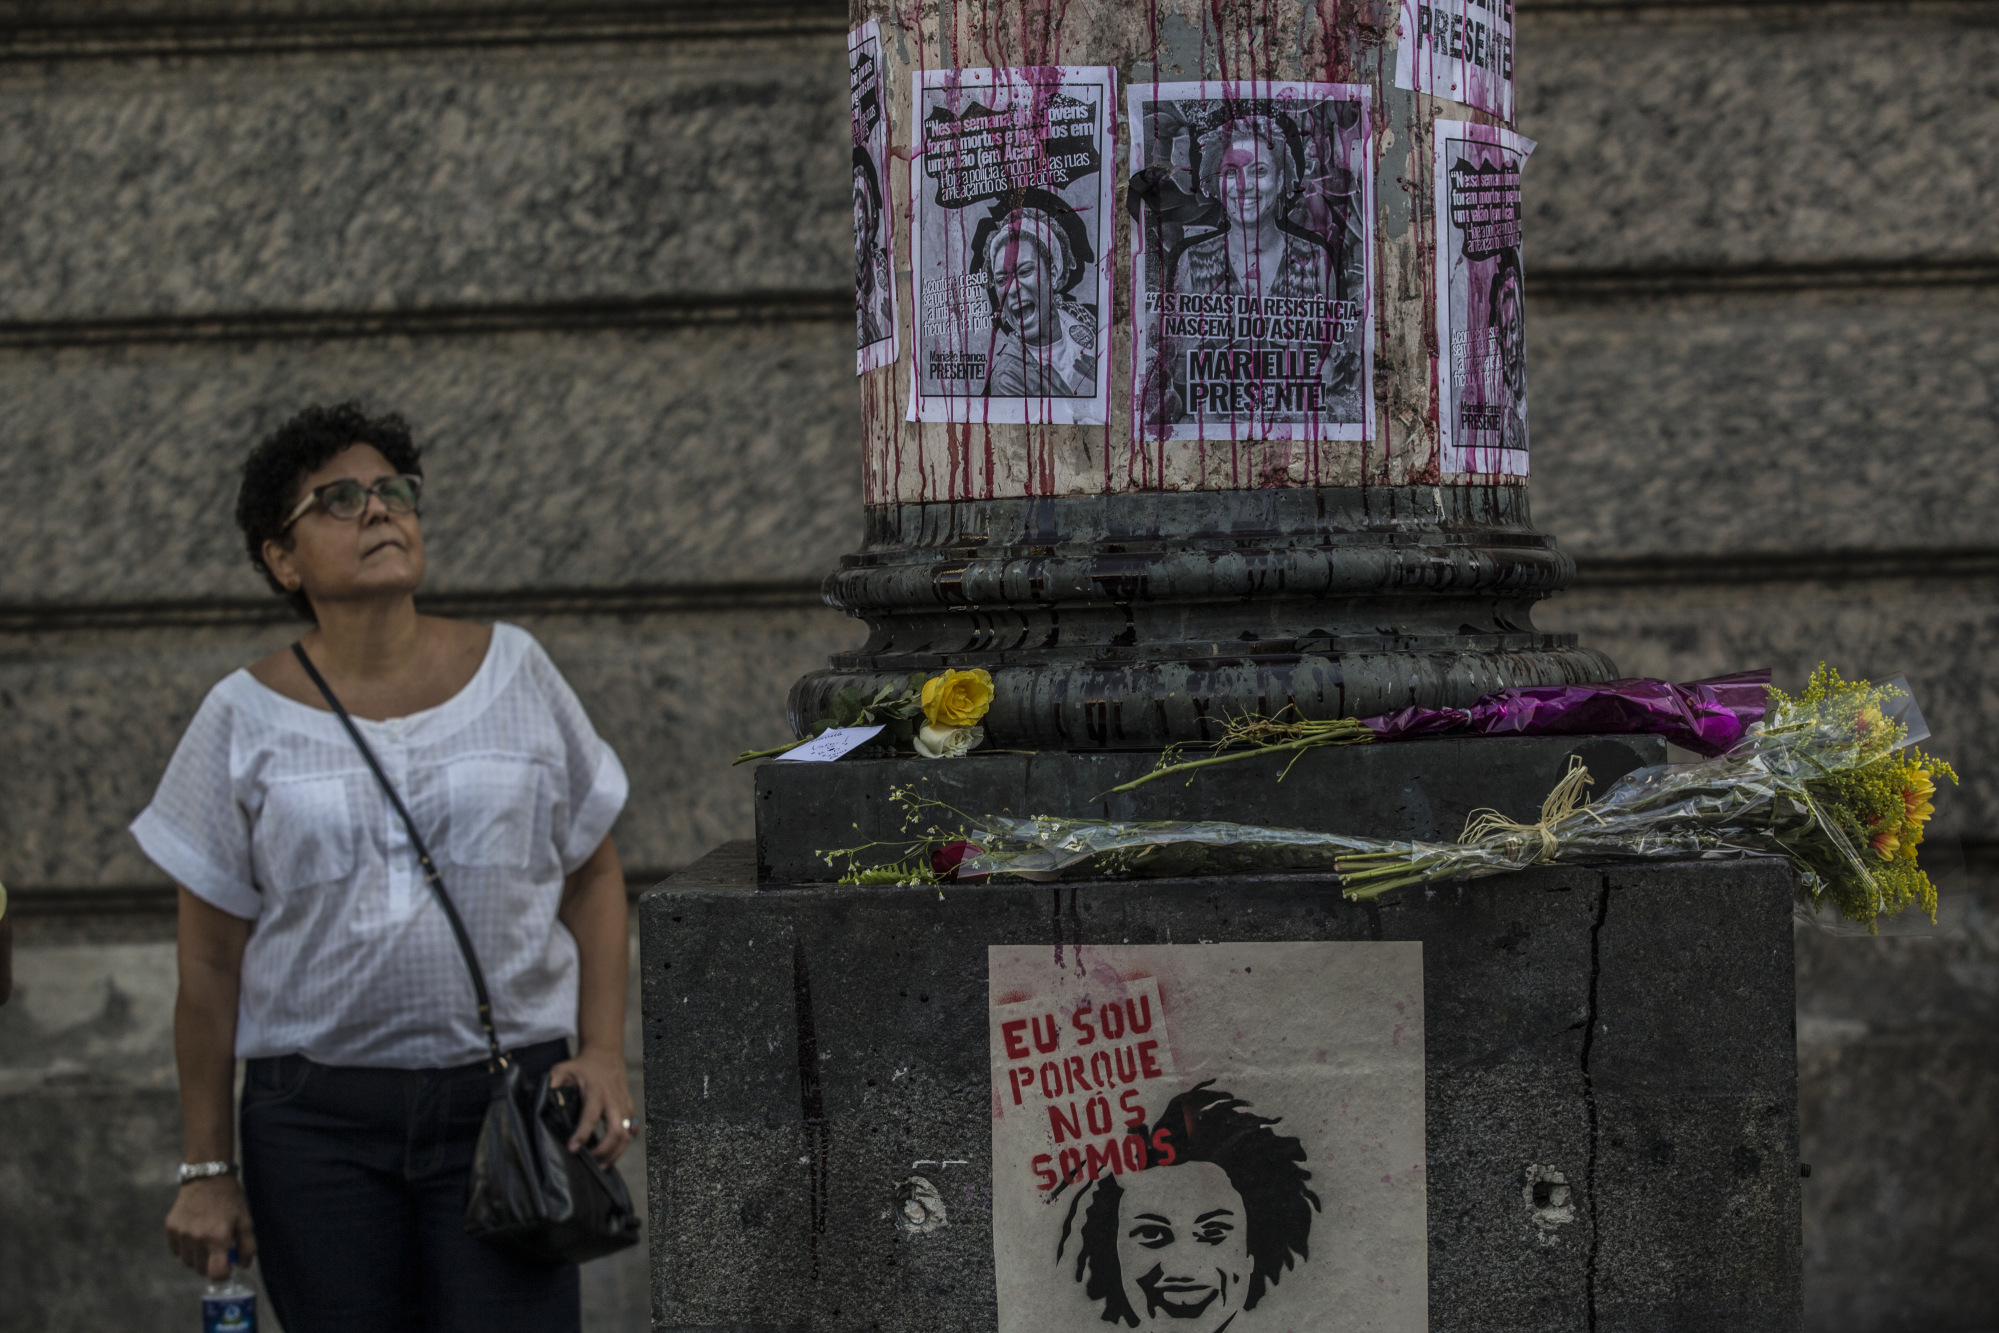 Posters depicting councilwoman Marielle Franco hang on display, the day after she was murdered, in Rio de Janeiro.